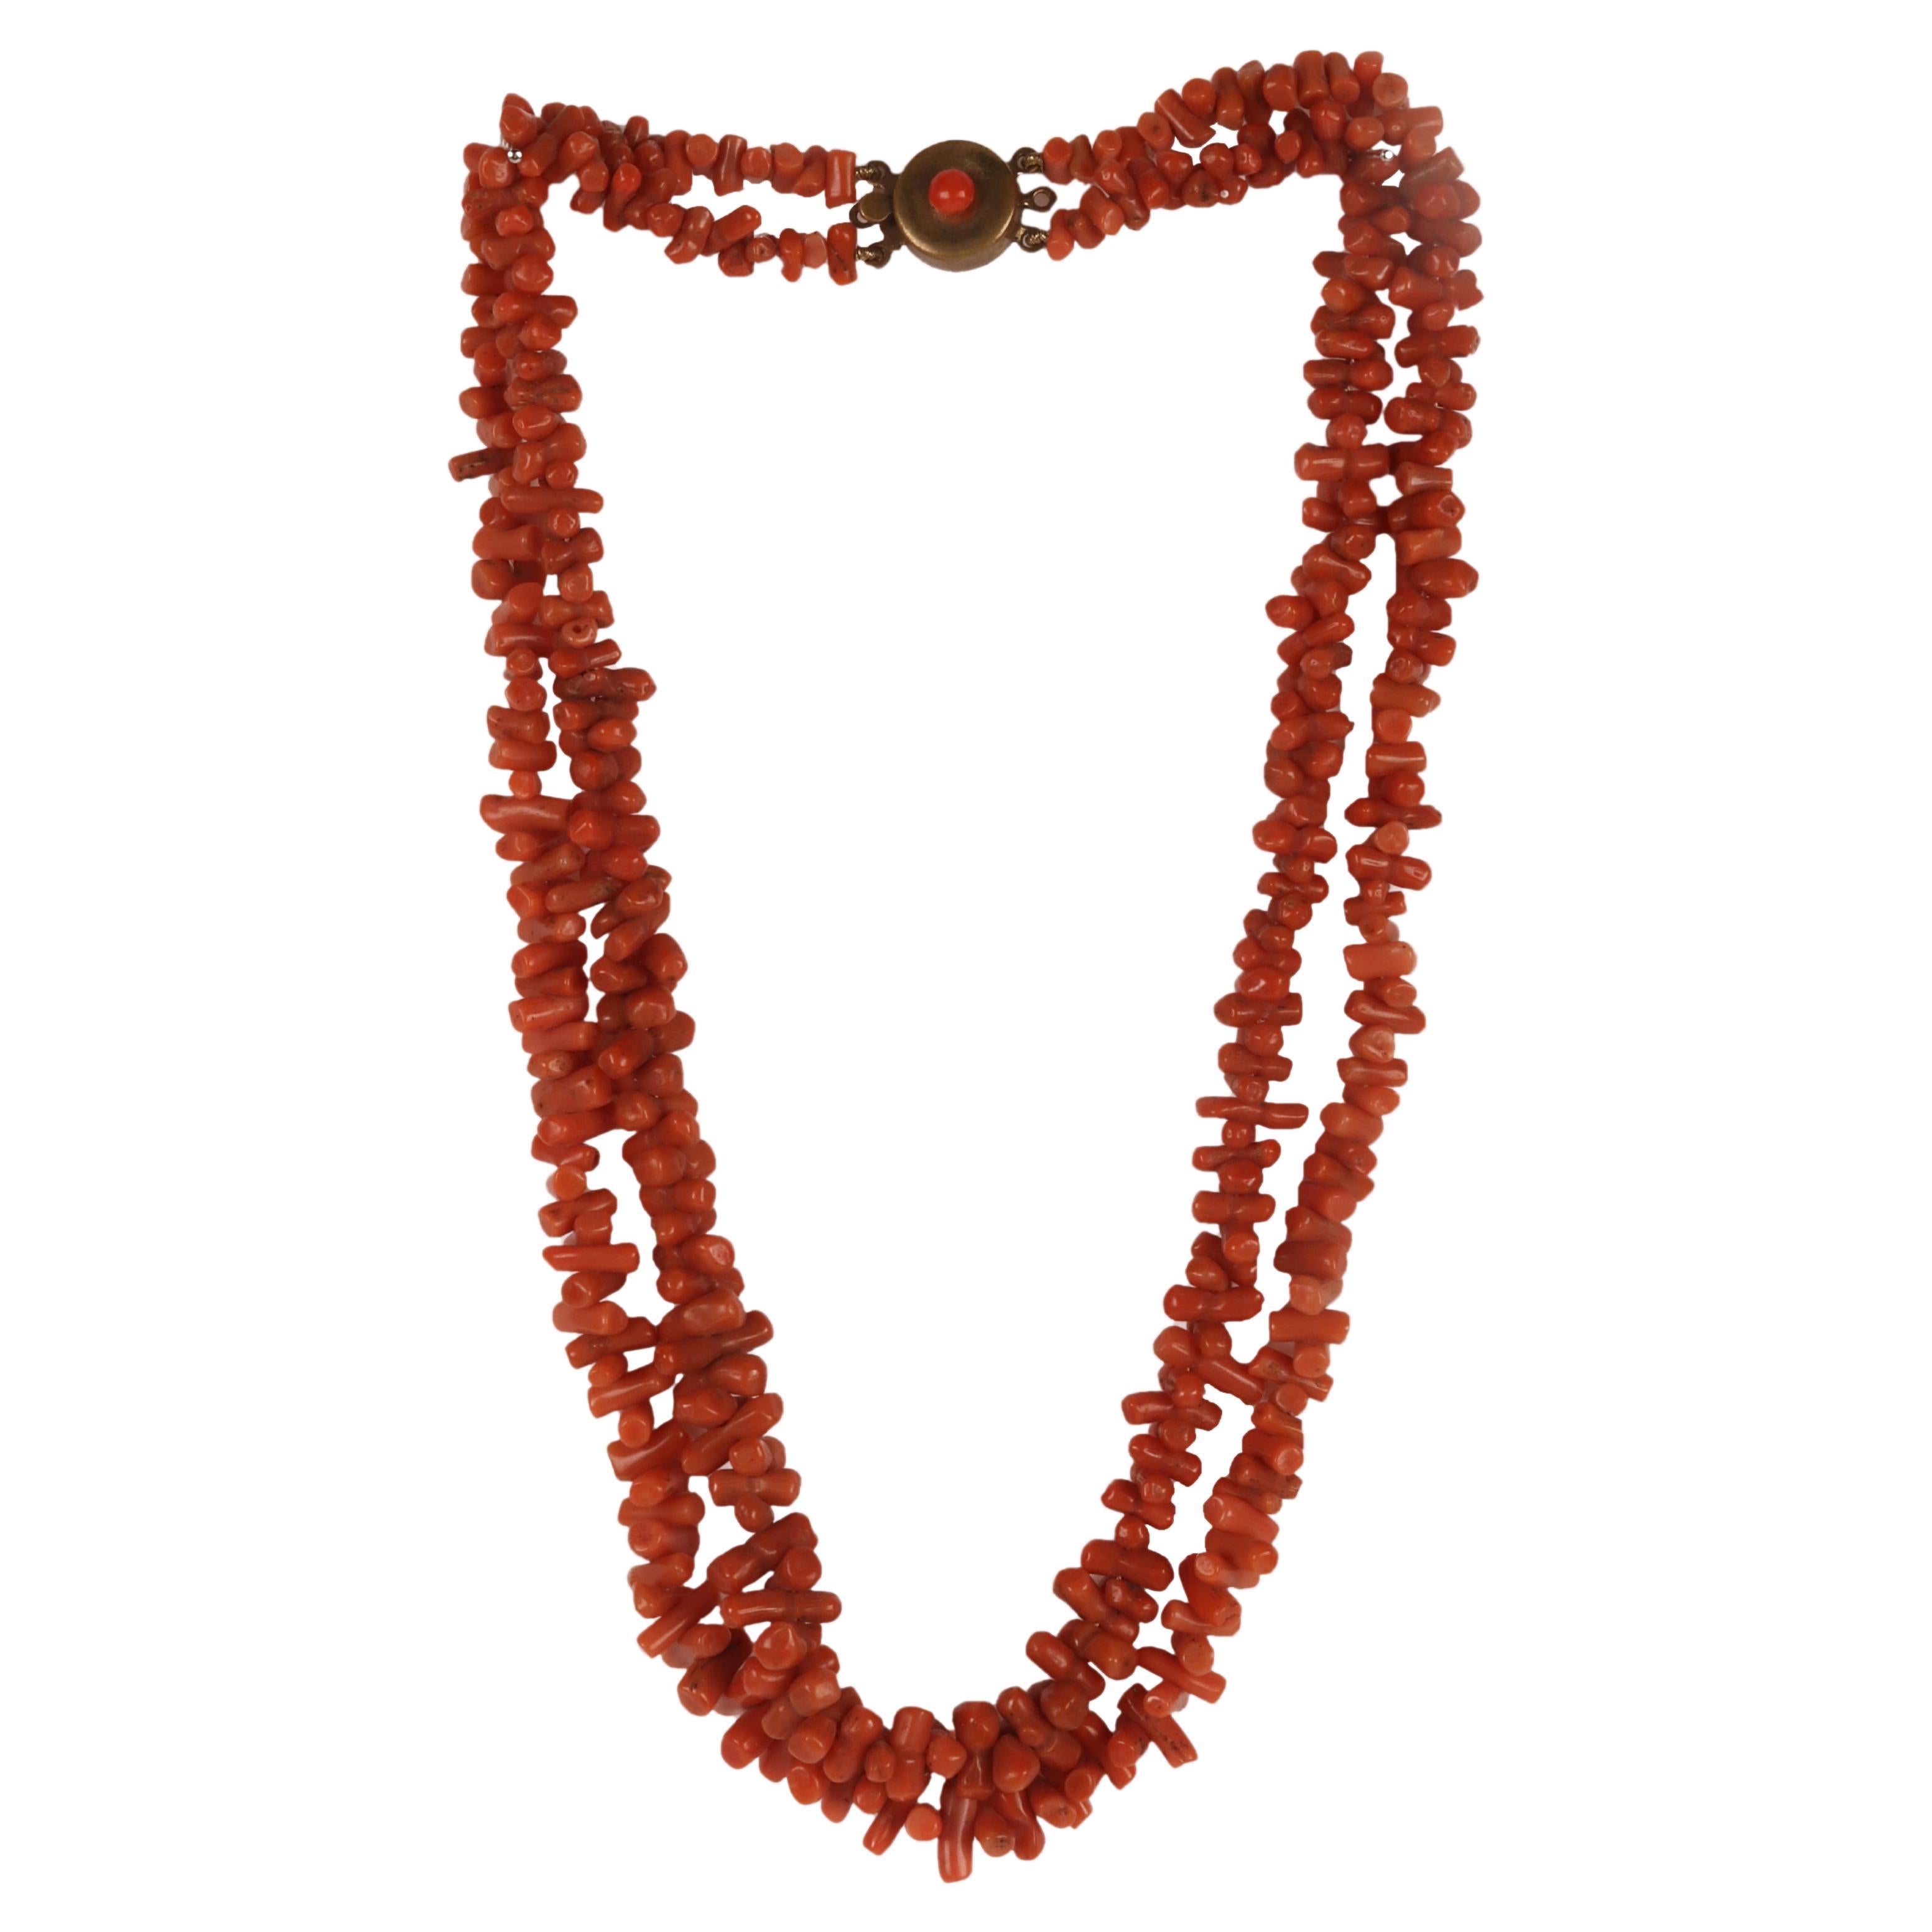 Sciacca coral necklace, England end of 19th century.